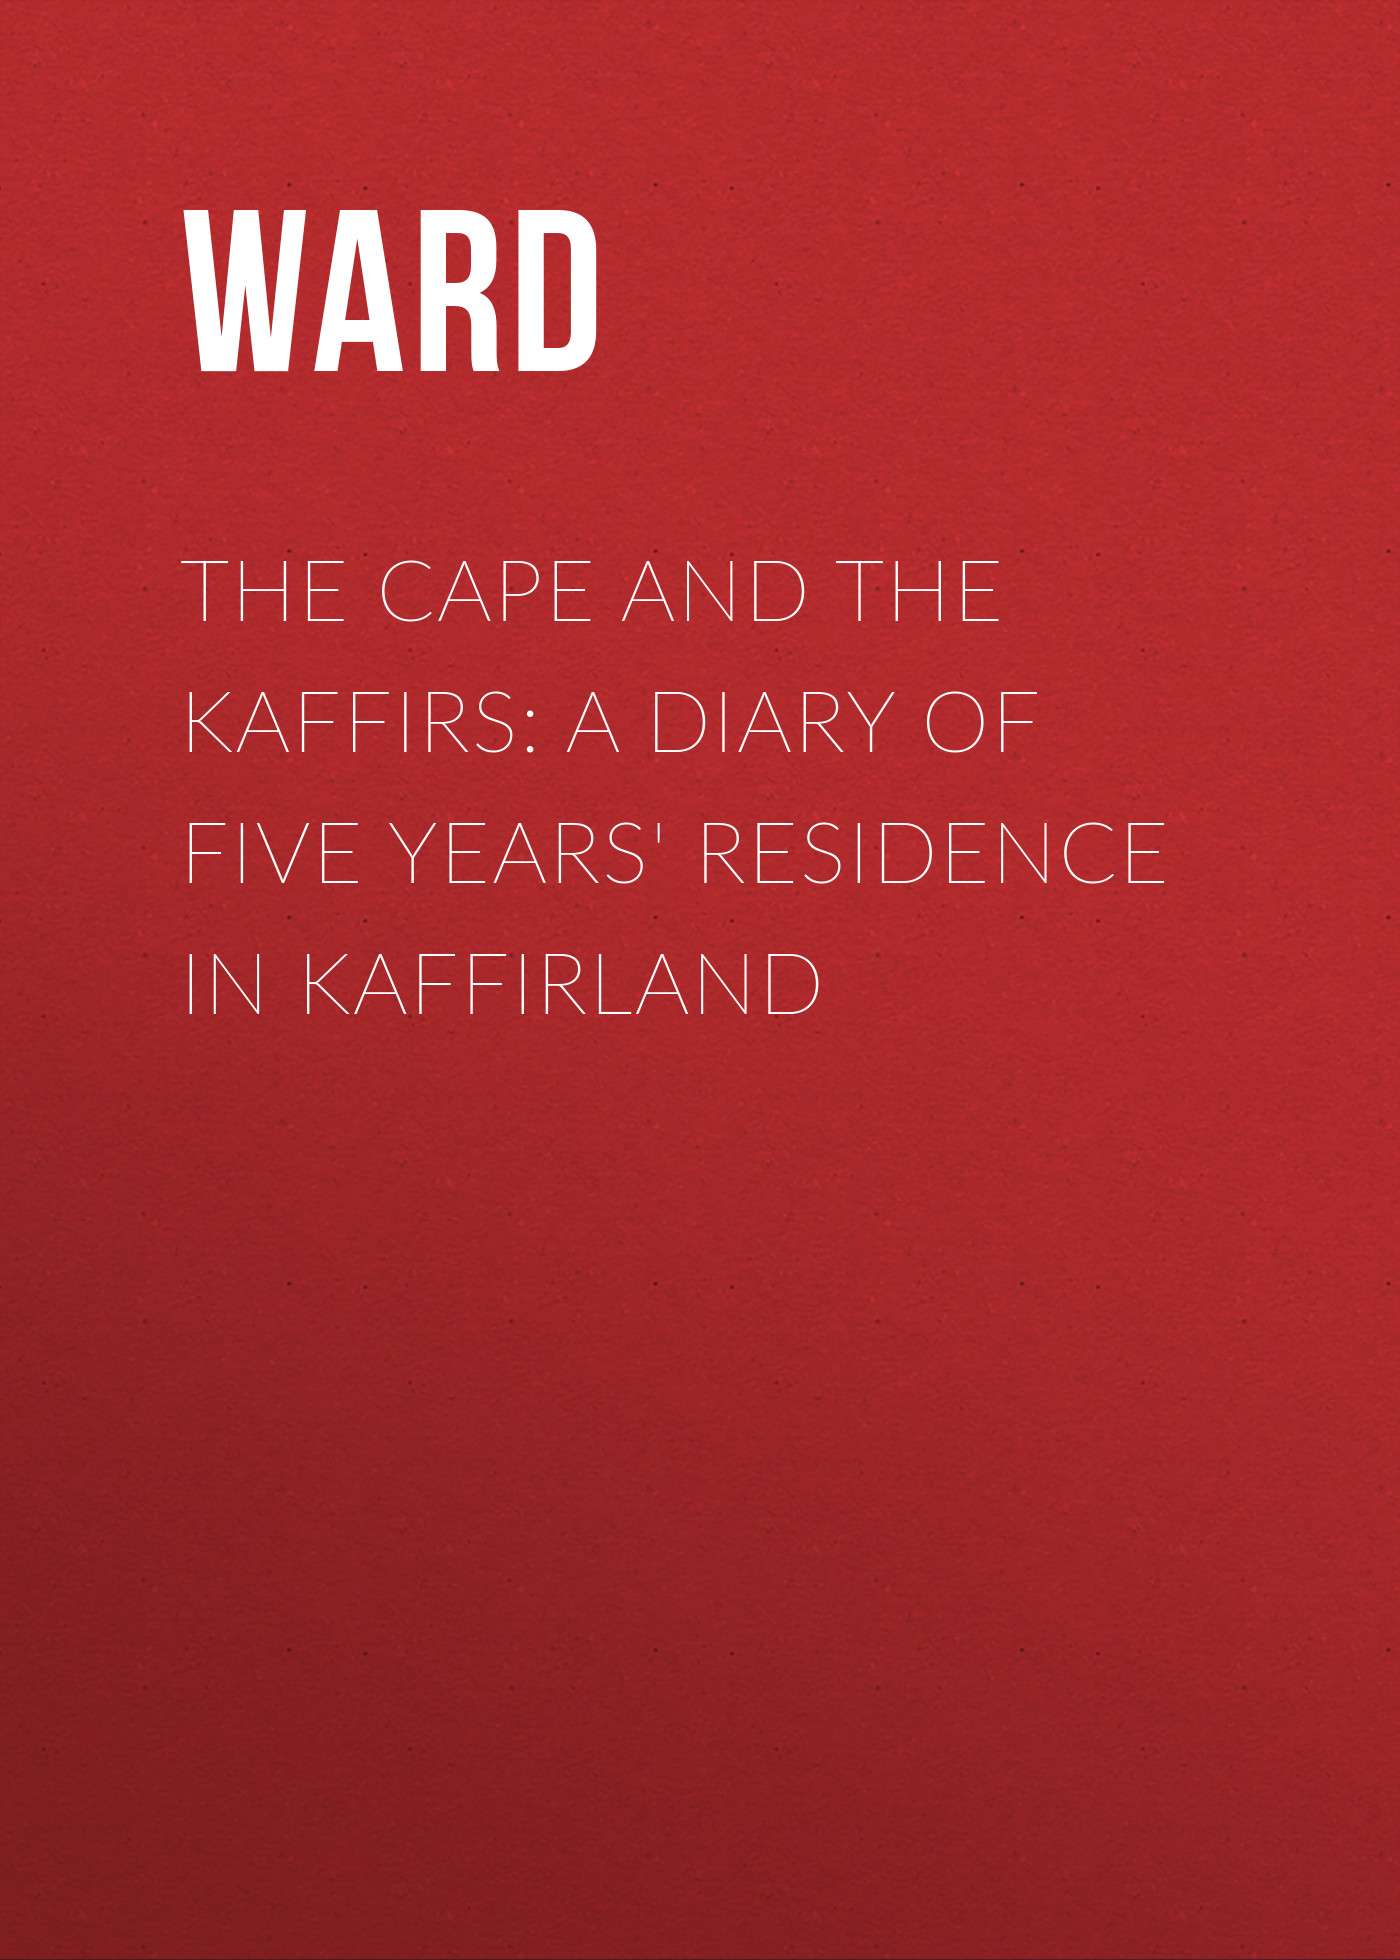 Ward The Cape and the Kaffirs: A Diary of Five Years' Residence in Kaffirland